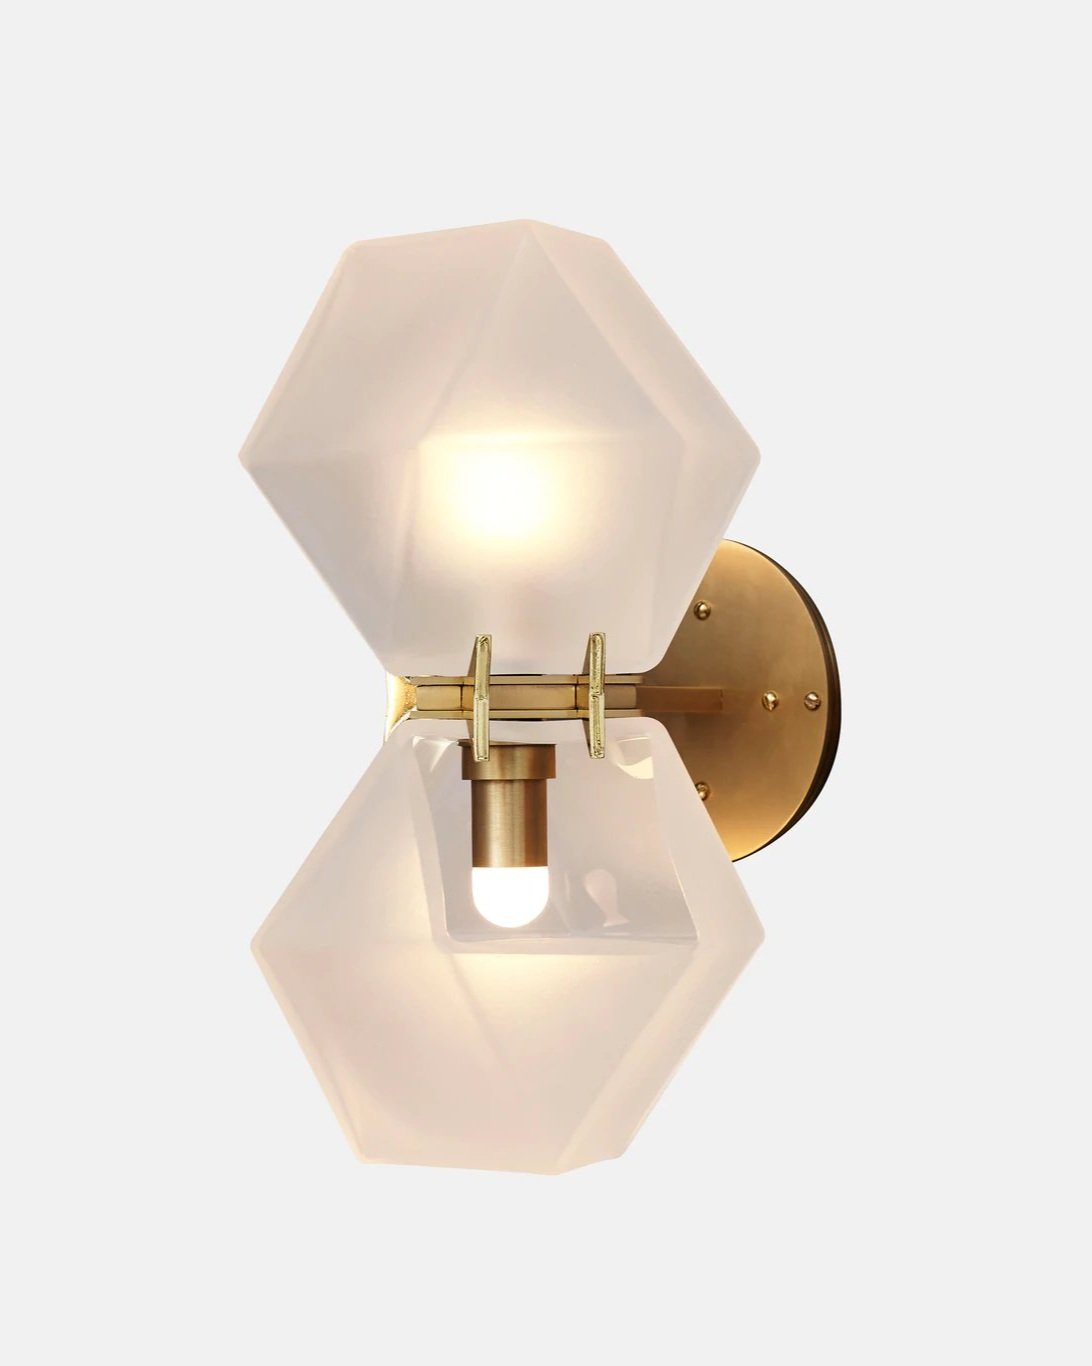 WELLES_GLASS_Double_Wall_Sconce_Brass_Alabaster_v2_1440x.jpg